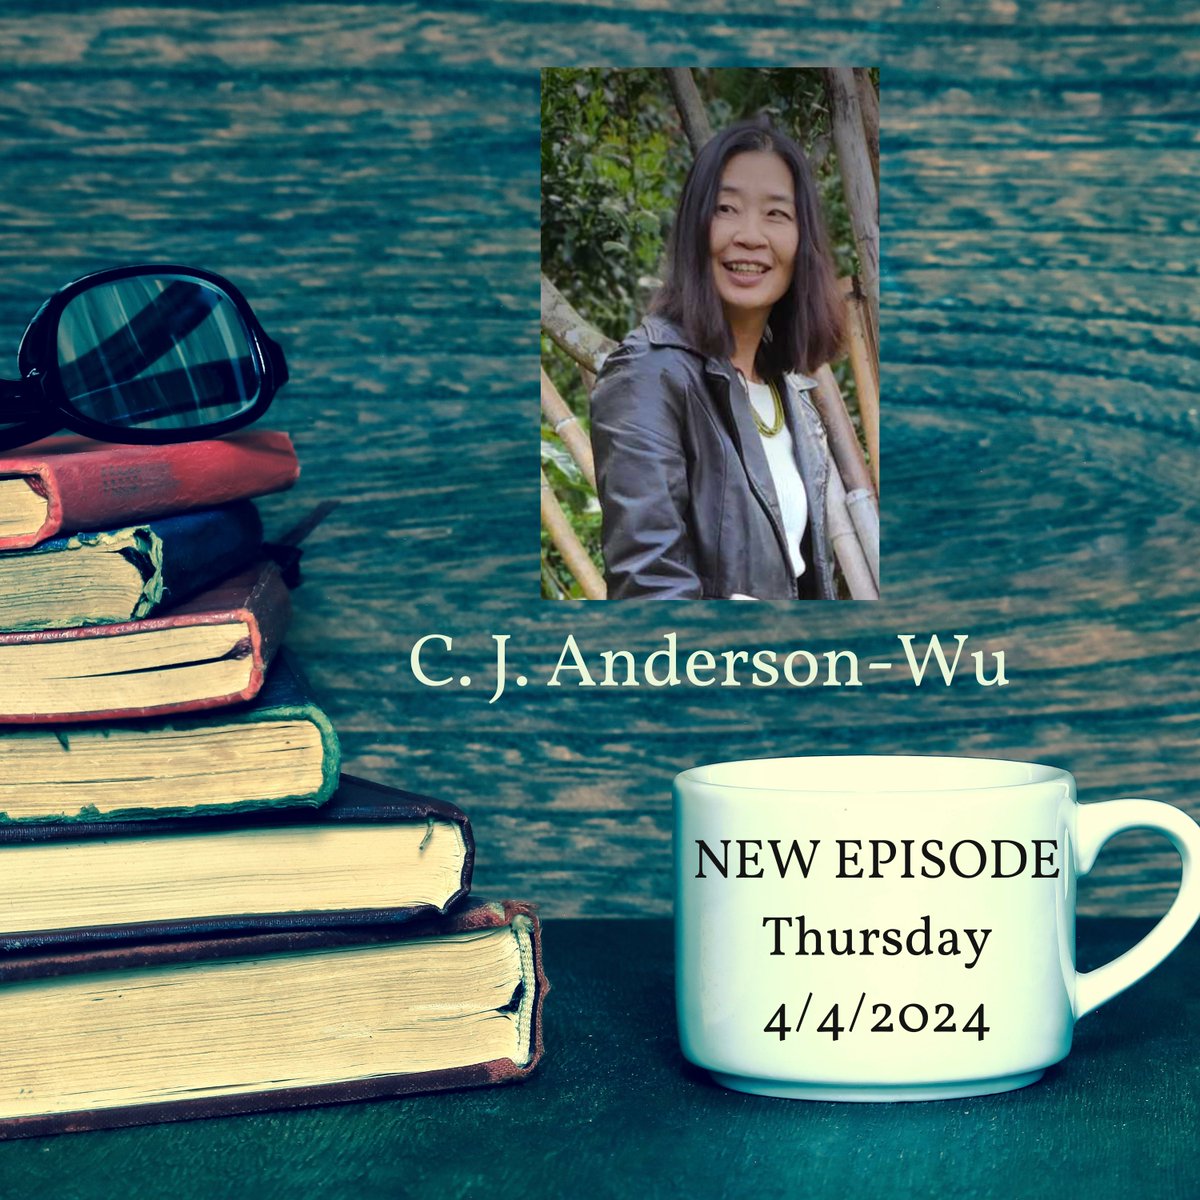 This week, experience Taiwan's military dictatorship like never before through the words of celebrated #poet C. J. Anderson-Wu (@TaiwanLiterary)! 

Only on the Present Poetry Podcast.

#poetrycommunity #podcastshow #podcastlife #newepisodecomingsoon #submitted #writingcommunity